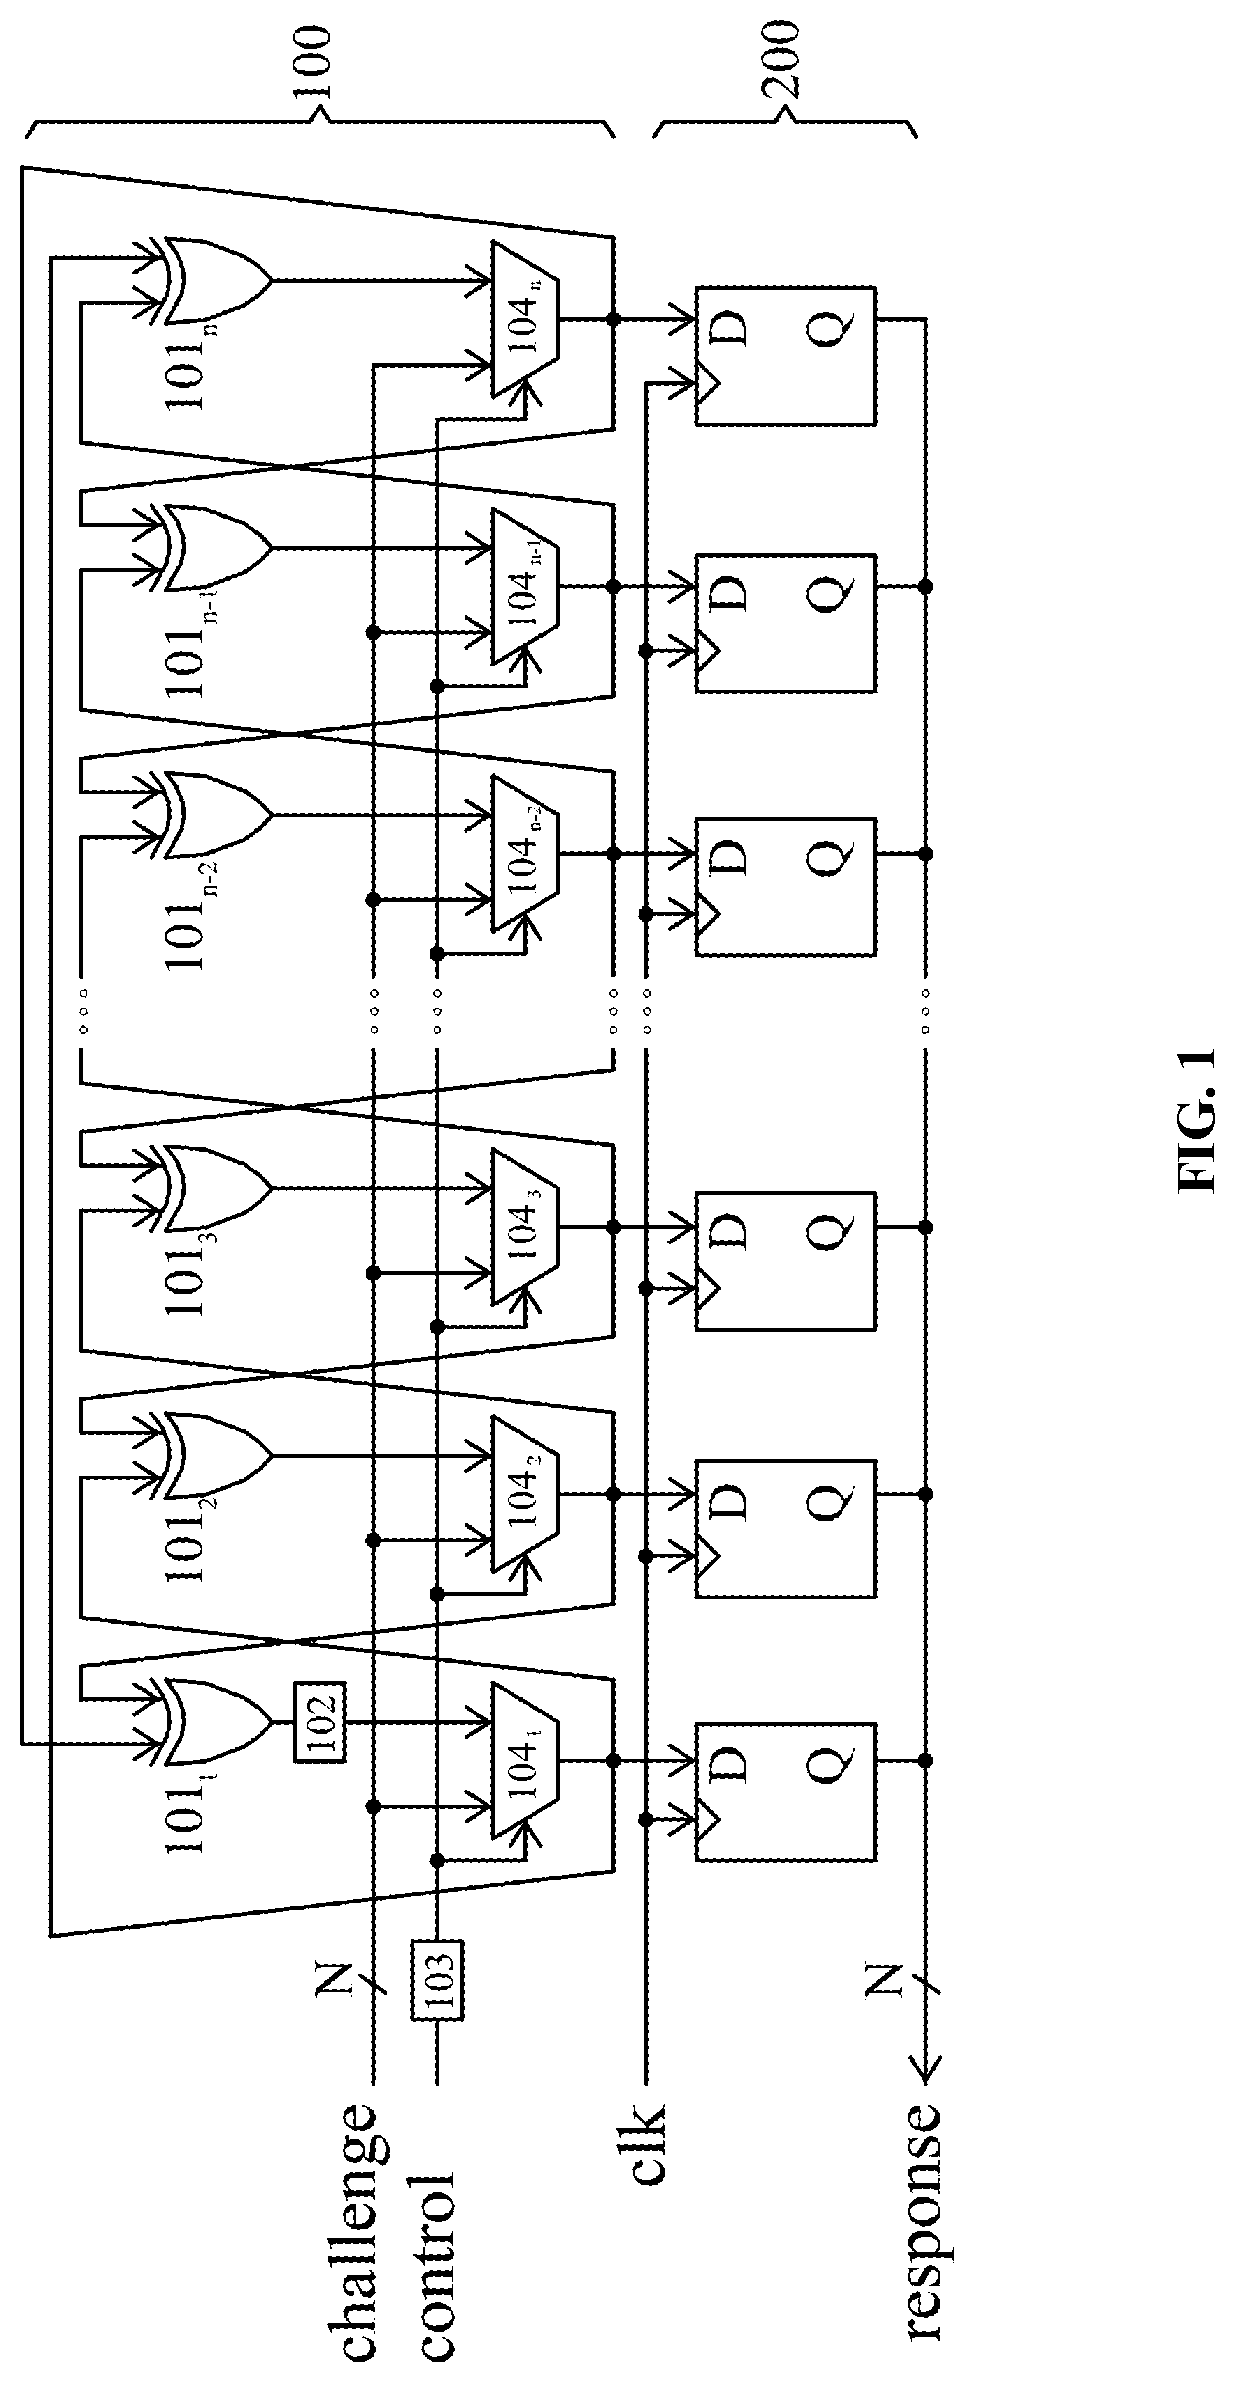 Multifunctional physically unclonable function device based on hybrid Boolean network